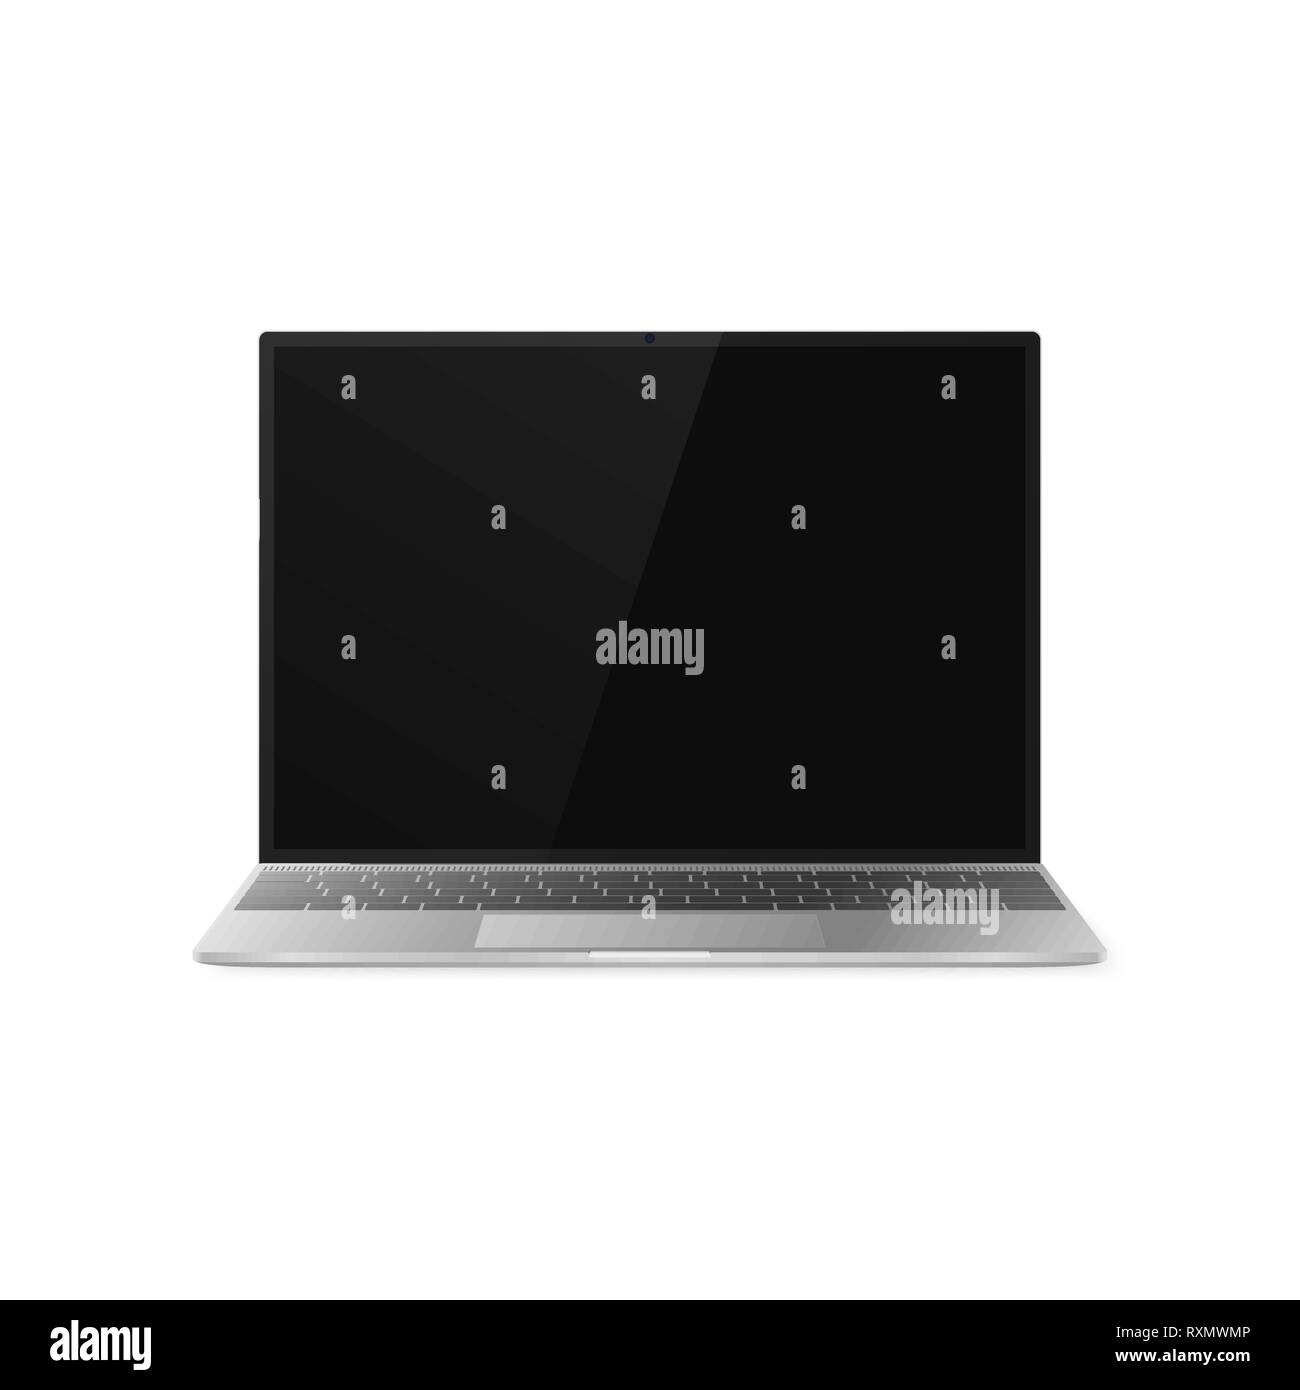 Laptop front view. Laptop with shadow isolated on white background. Laptop design with black display and gray keyboard. Vector illustration Stock Vector